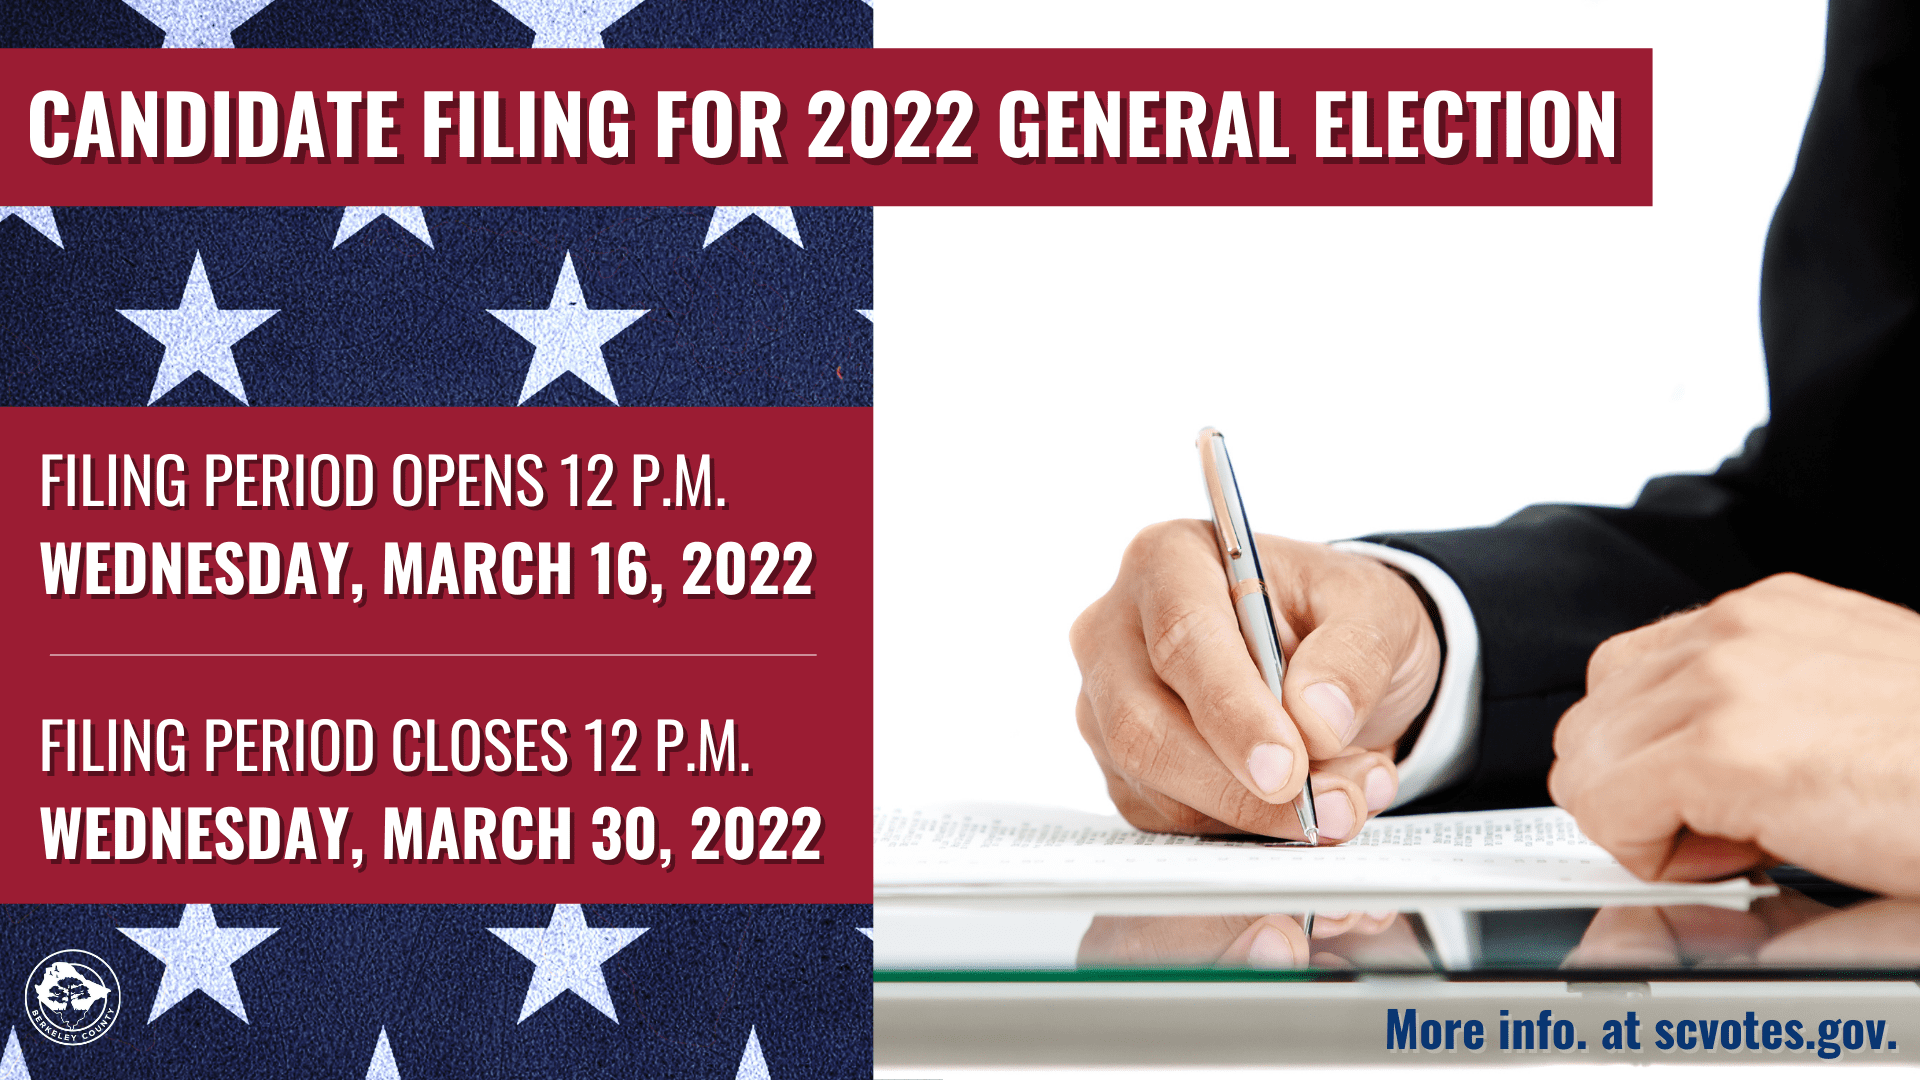 Berkeley County Announces Candidate Filing Info. for 2022 General Election